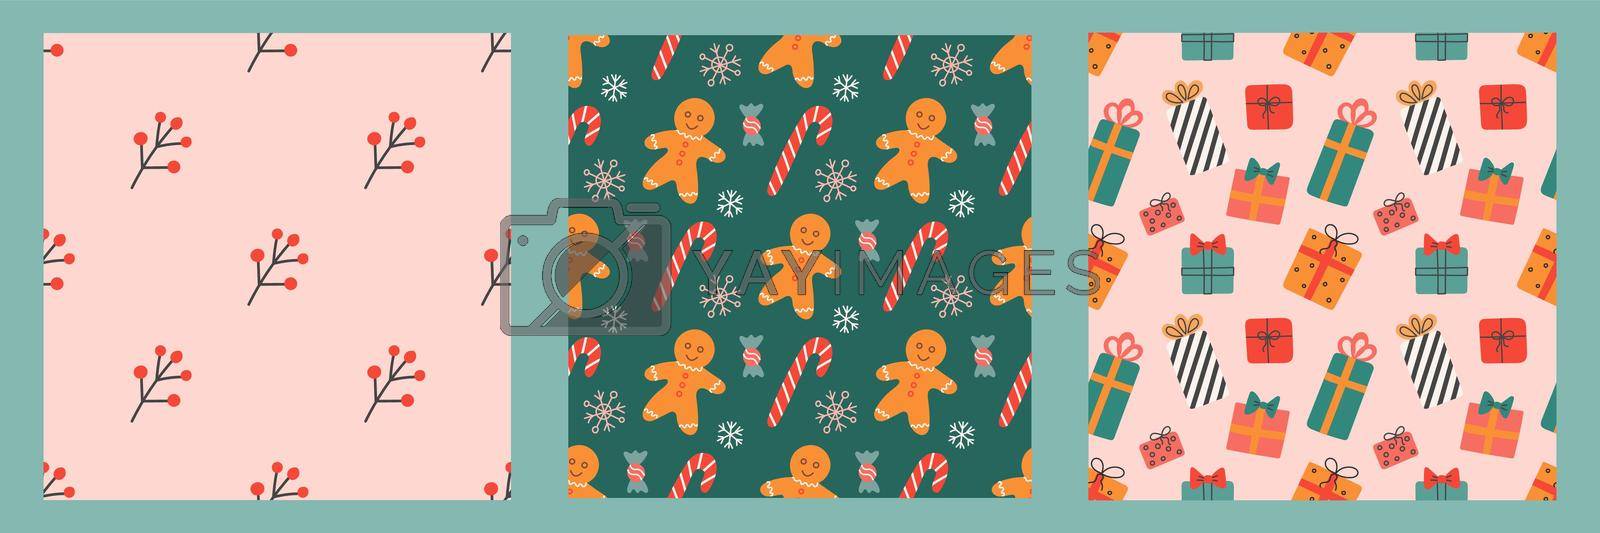 Royalty free image of Set of seamless patterns for Christmas and New Year. Vector cute holiday backgrounds by vetriciya_art